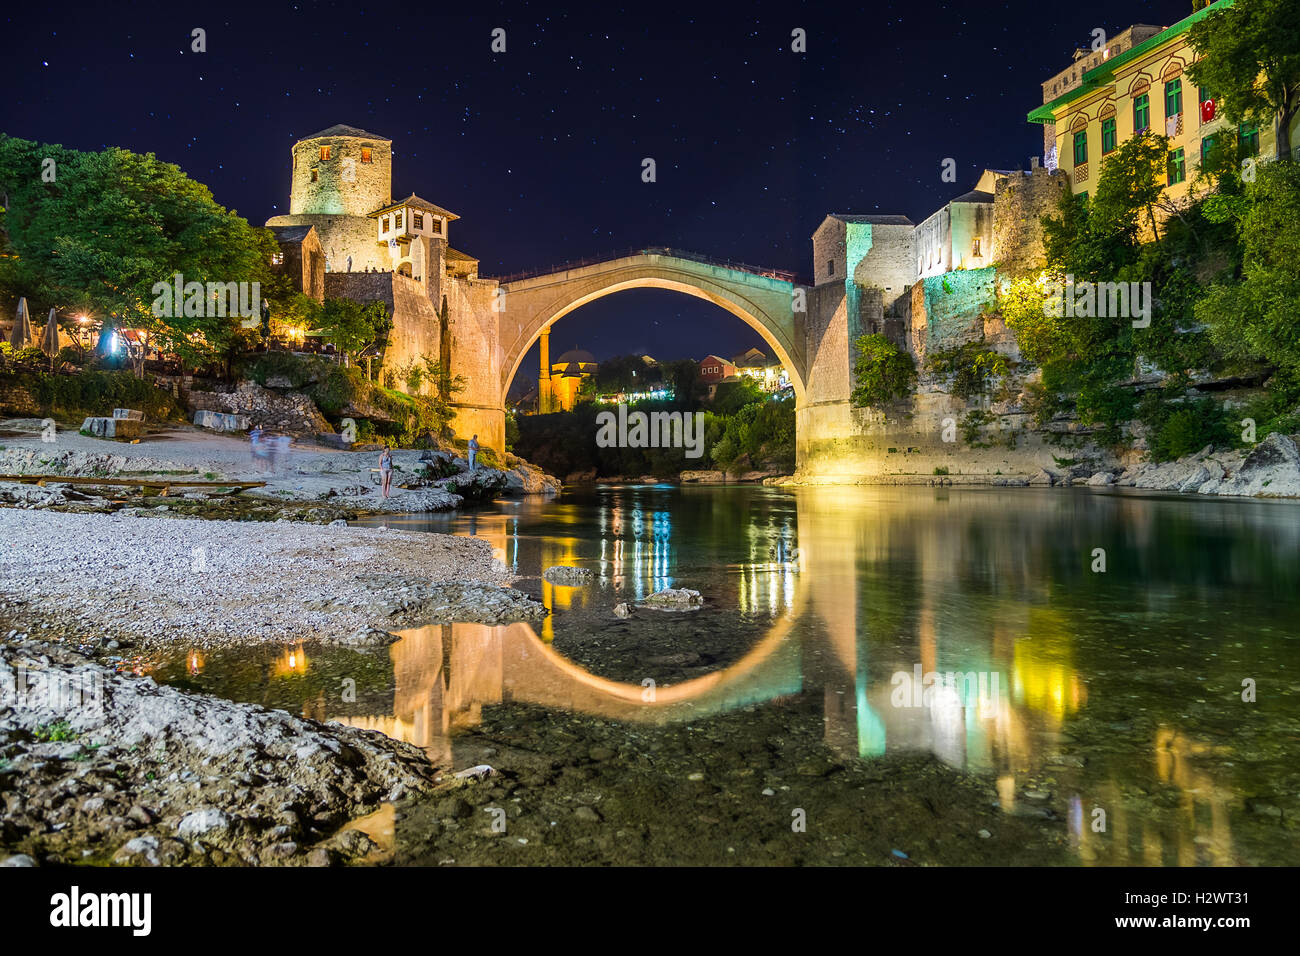 A view of the Mostar skyline at night towards the Old Bridge (Stari Most). Buildings and the River Neretva can be seen. Stock Photo